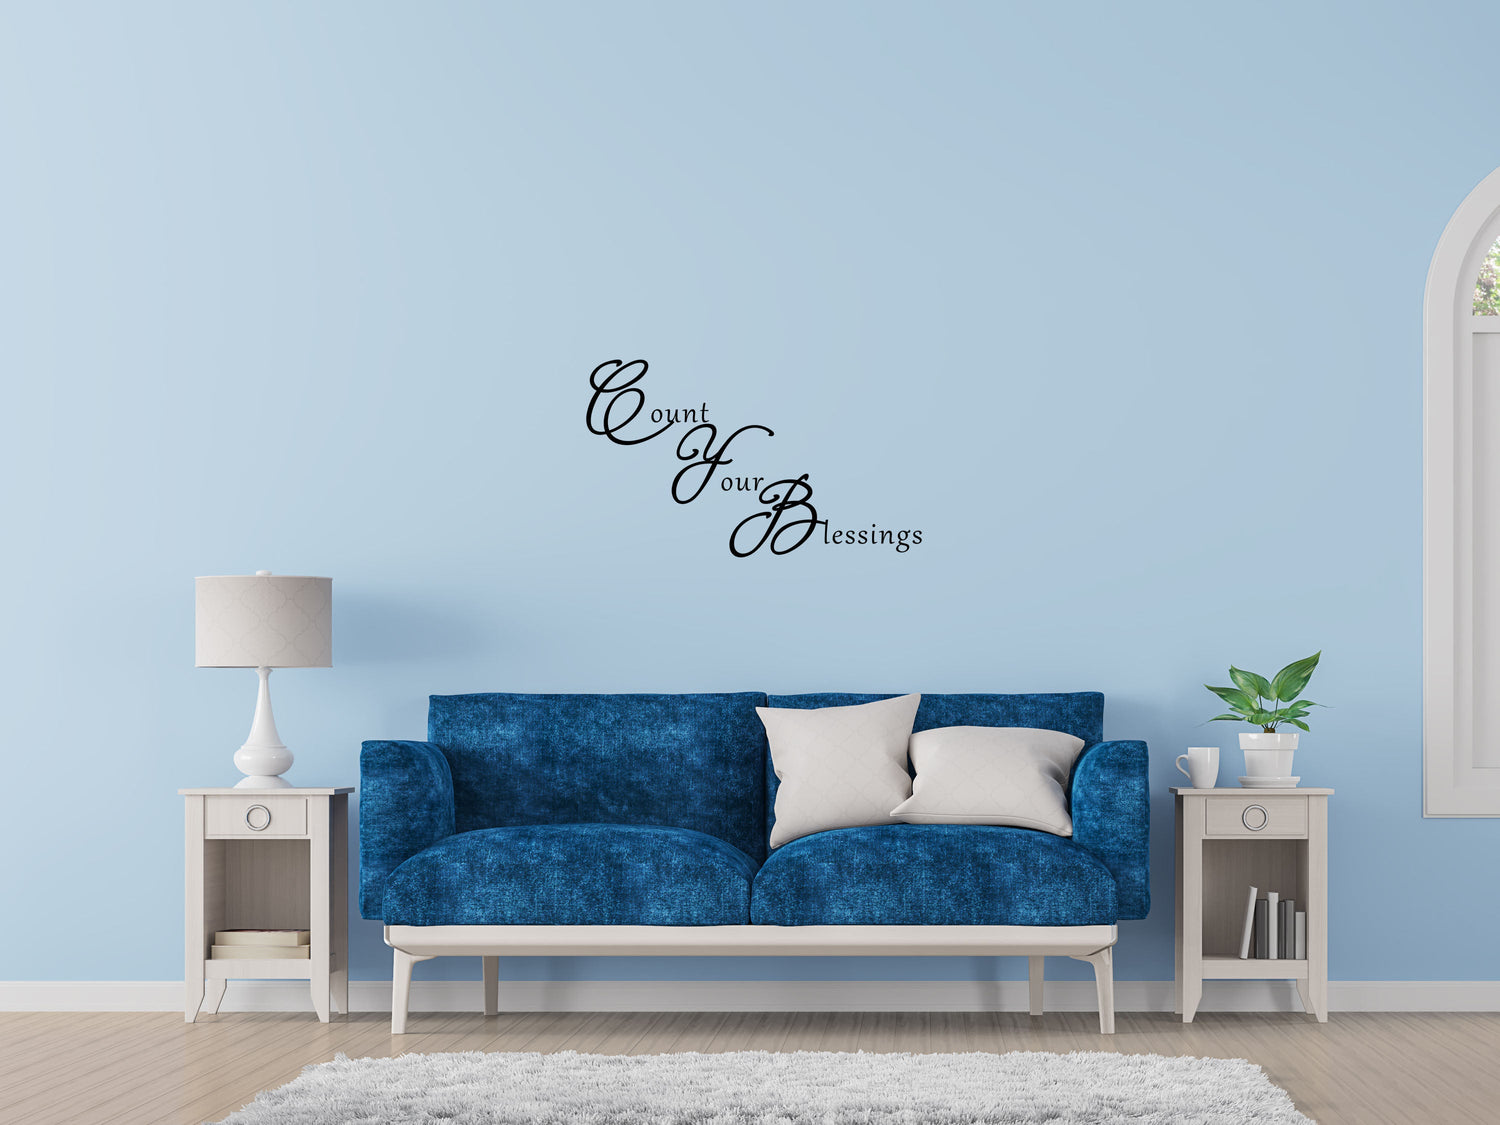 Count Your Blessings Wall Decal Vinyl Wall Decal Inspirational Wall Signs 